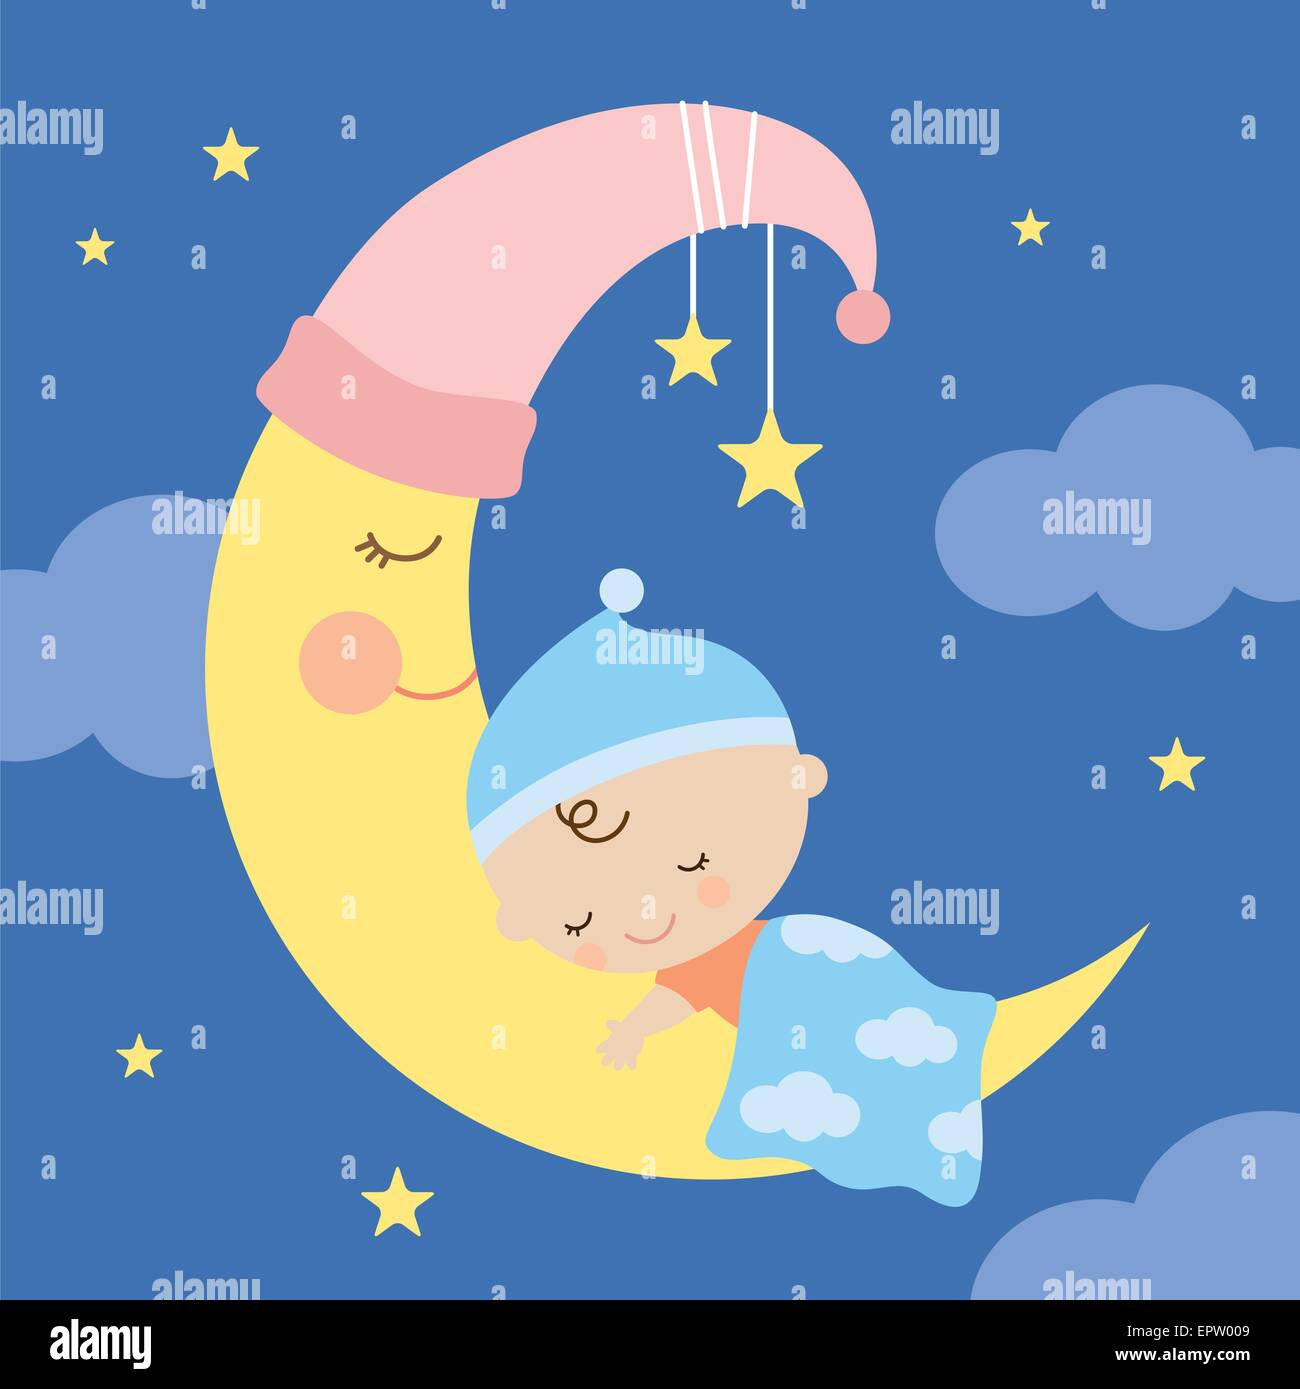 Vector illustration of a baby sleeping on the moon Stock Vector Image ...